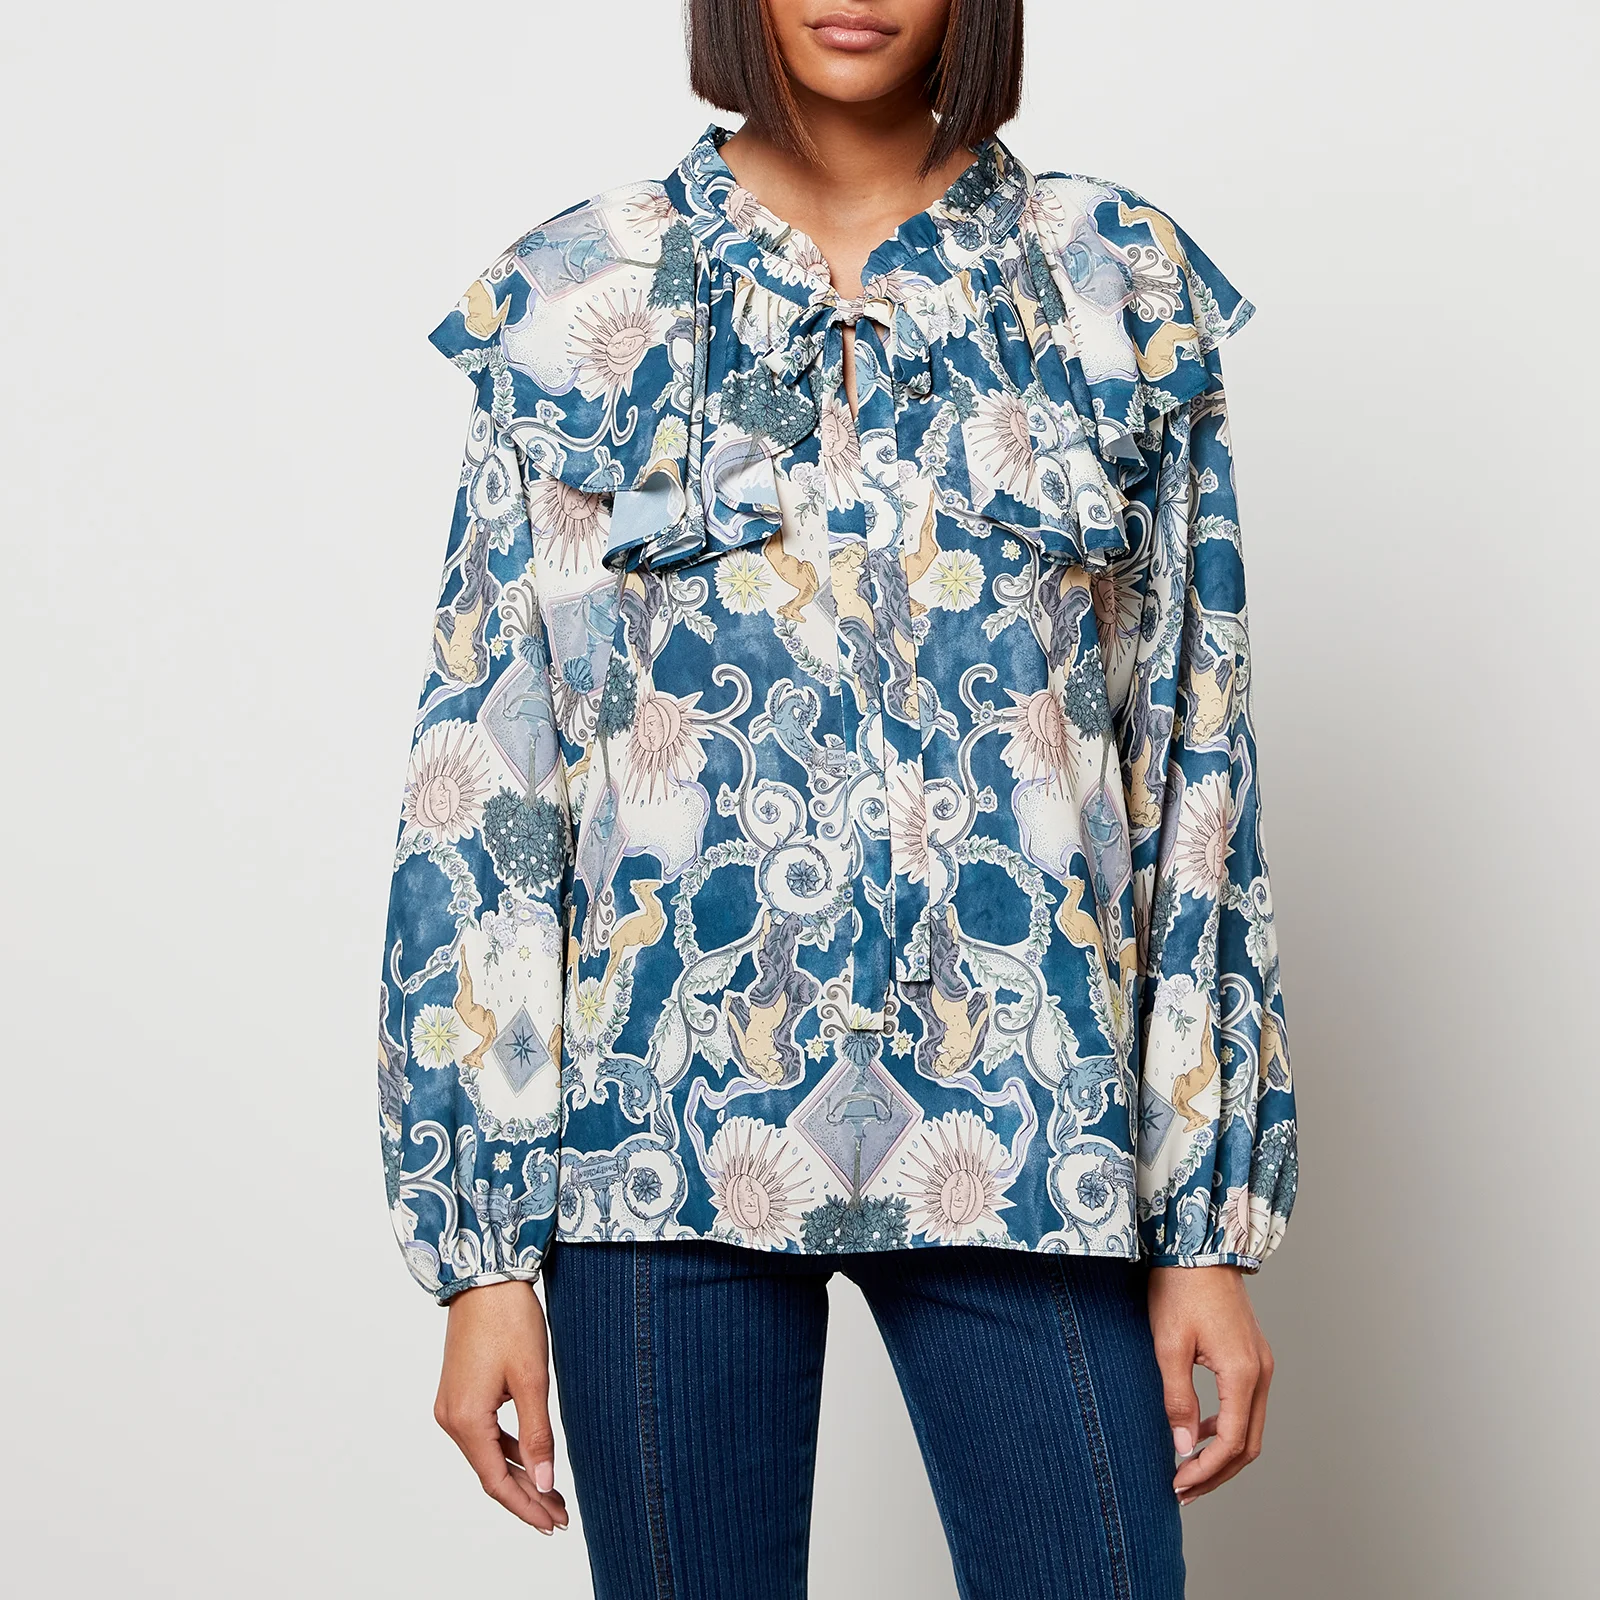 See By Chloe Women's Lovers Print Blouse - Multicolor Blue Image 1